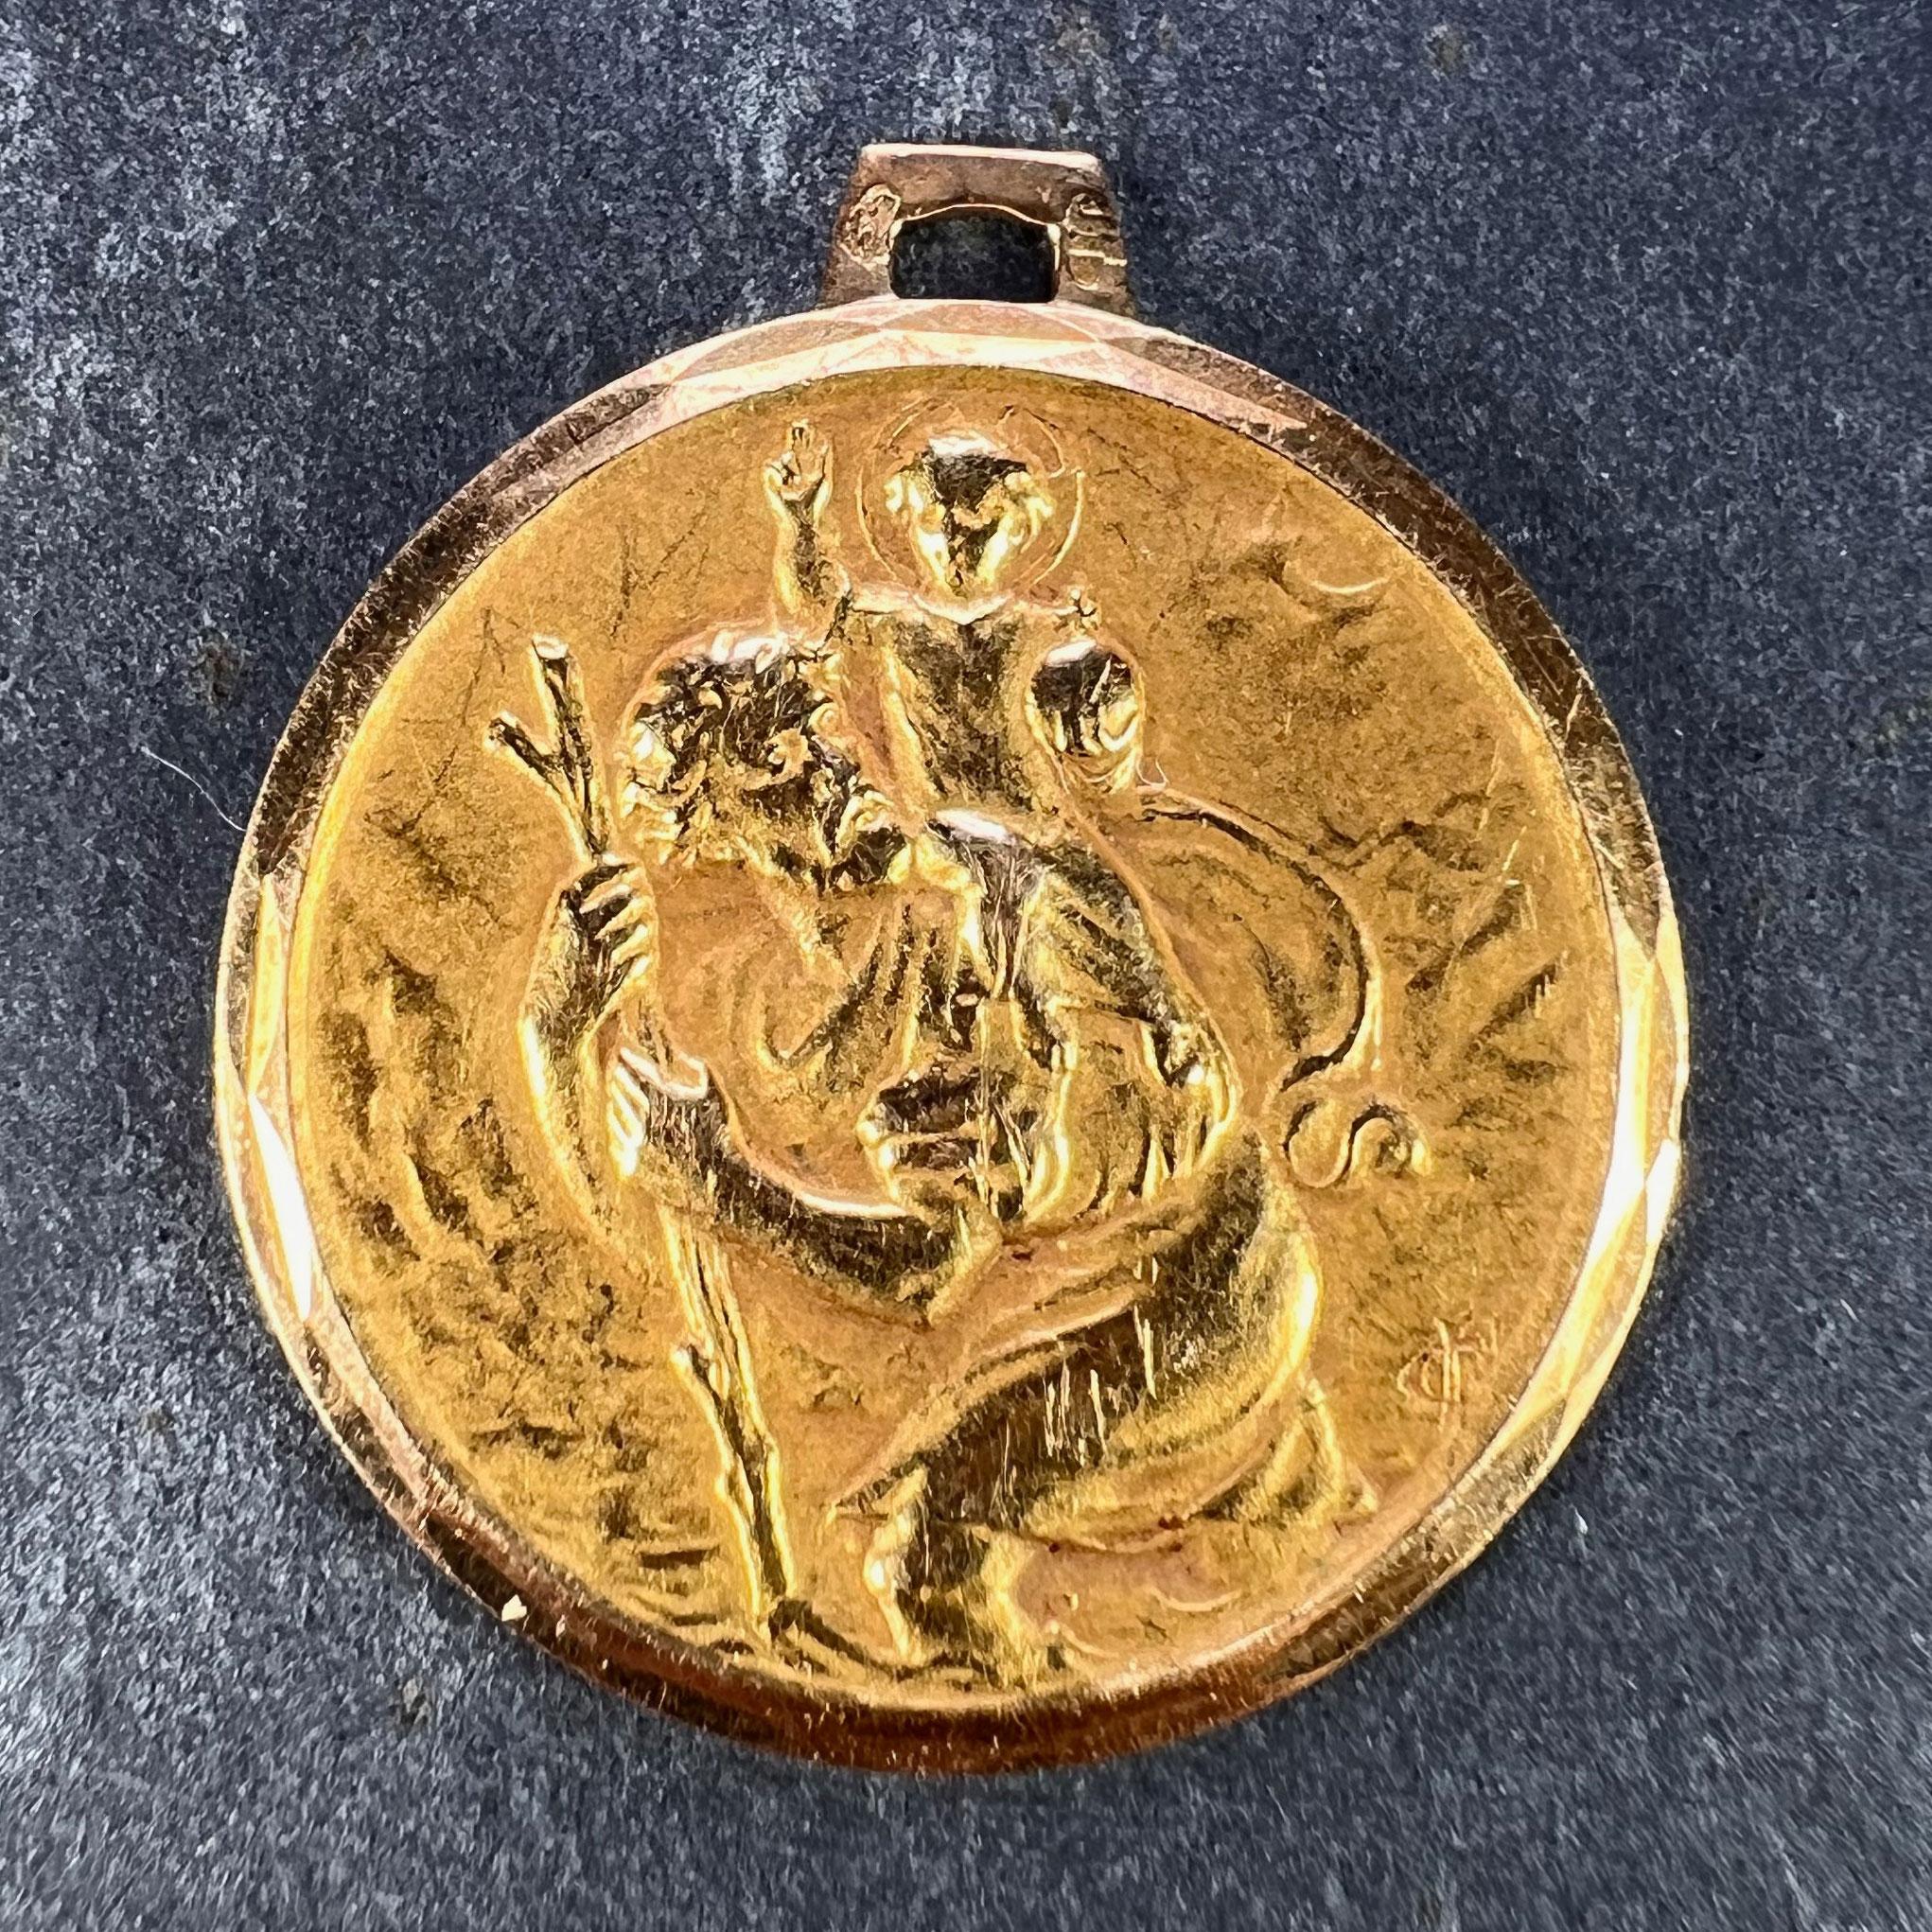 A French 18 karat (18K) yellow gold charm pendant designed as a medal depicting St Christopher as he carries the infant Christ across a river with an unknown signature. Stamped with the eagle’s head for French manufacture and 18 karat gold, and an